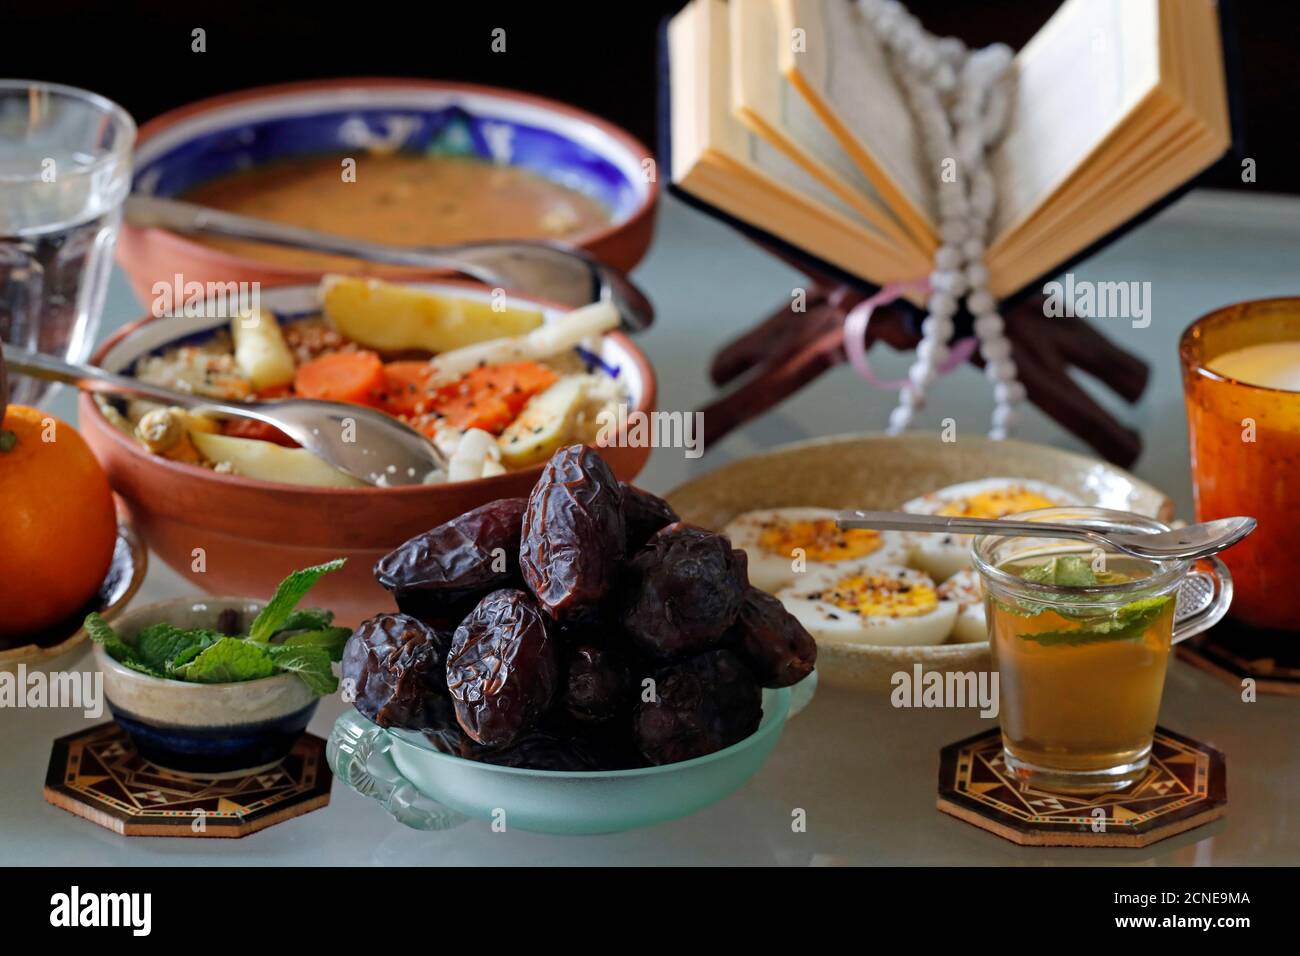 Traditional meal for iftar in time of Ramadan after the fast has been broken, France, Europe Stock Photo